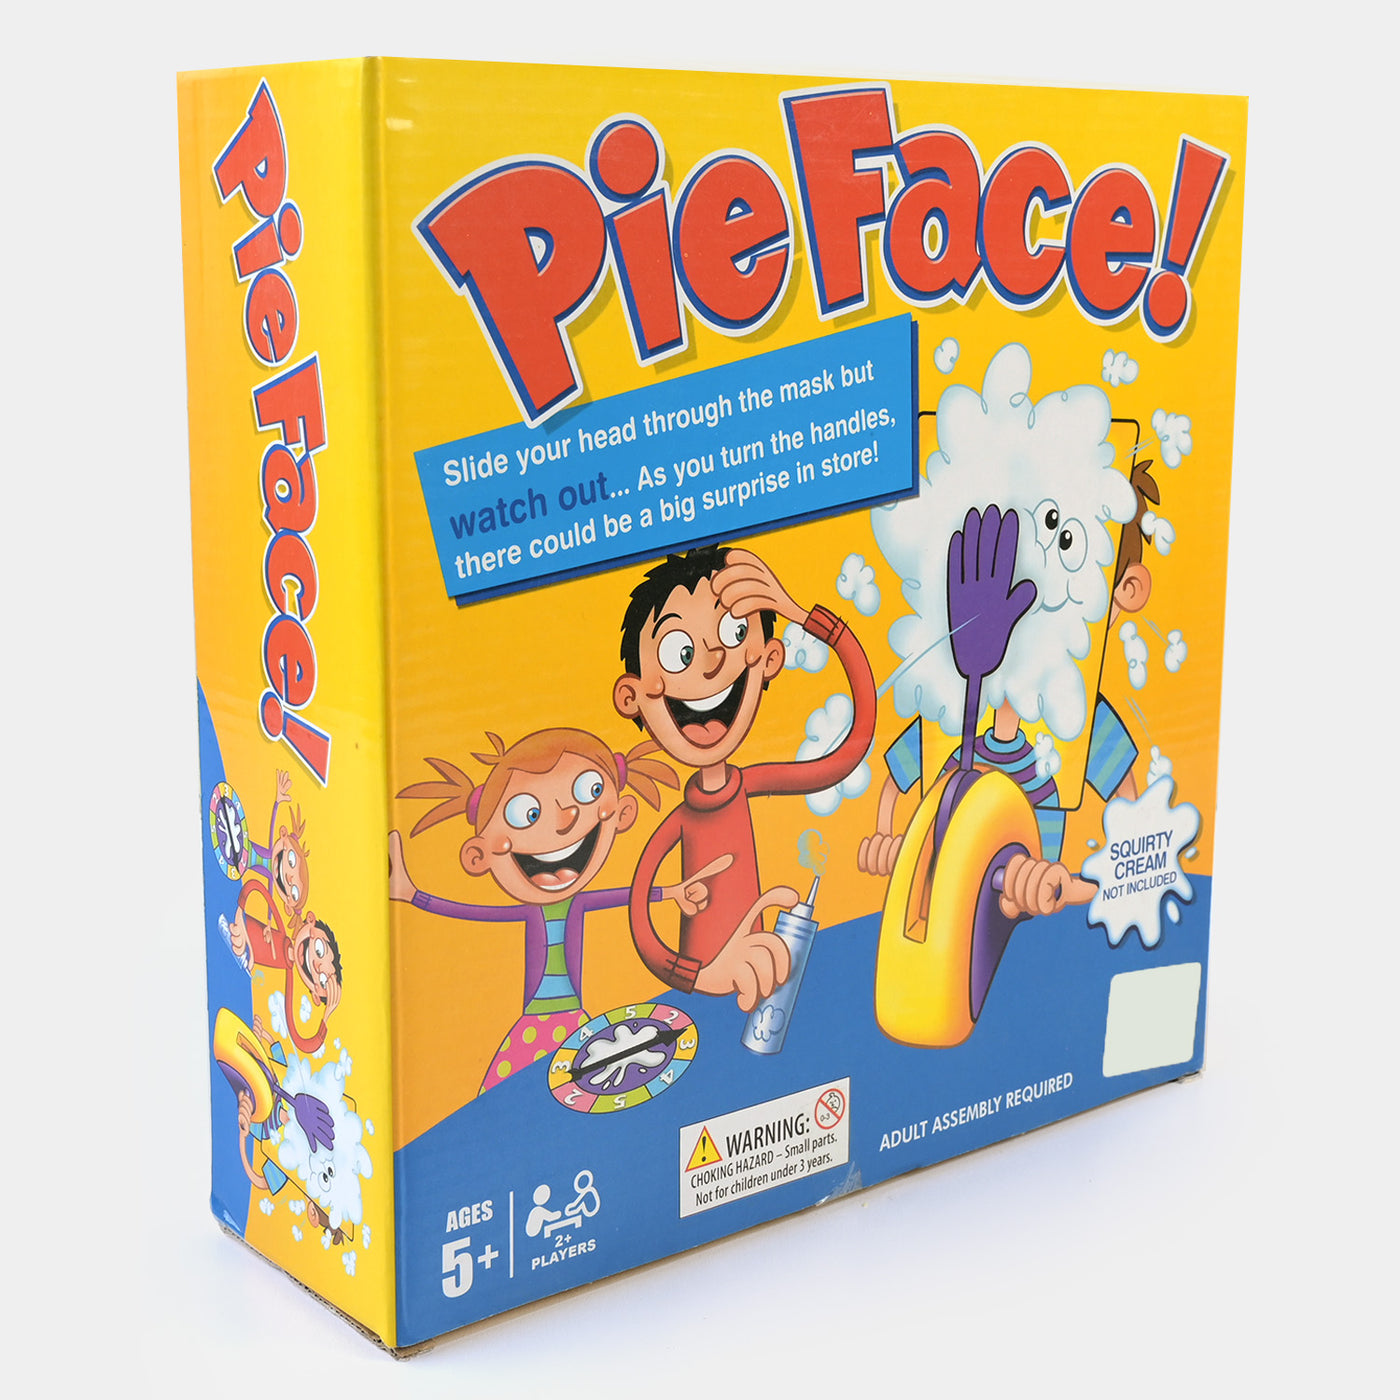 Pie face game For Kids